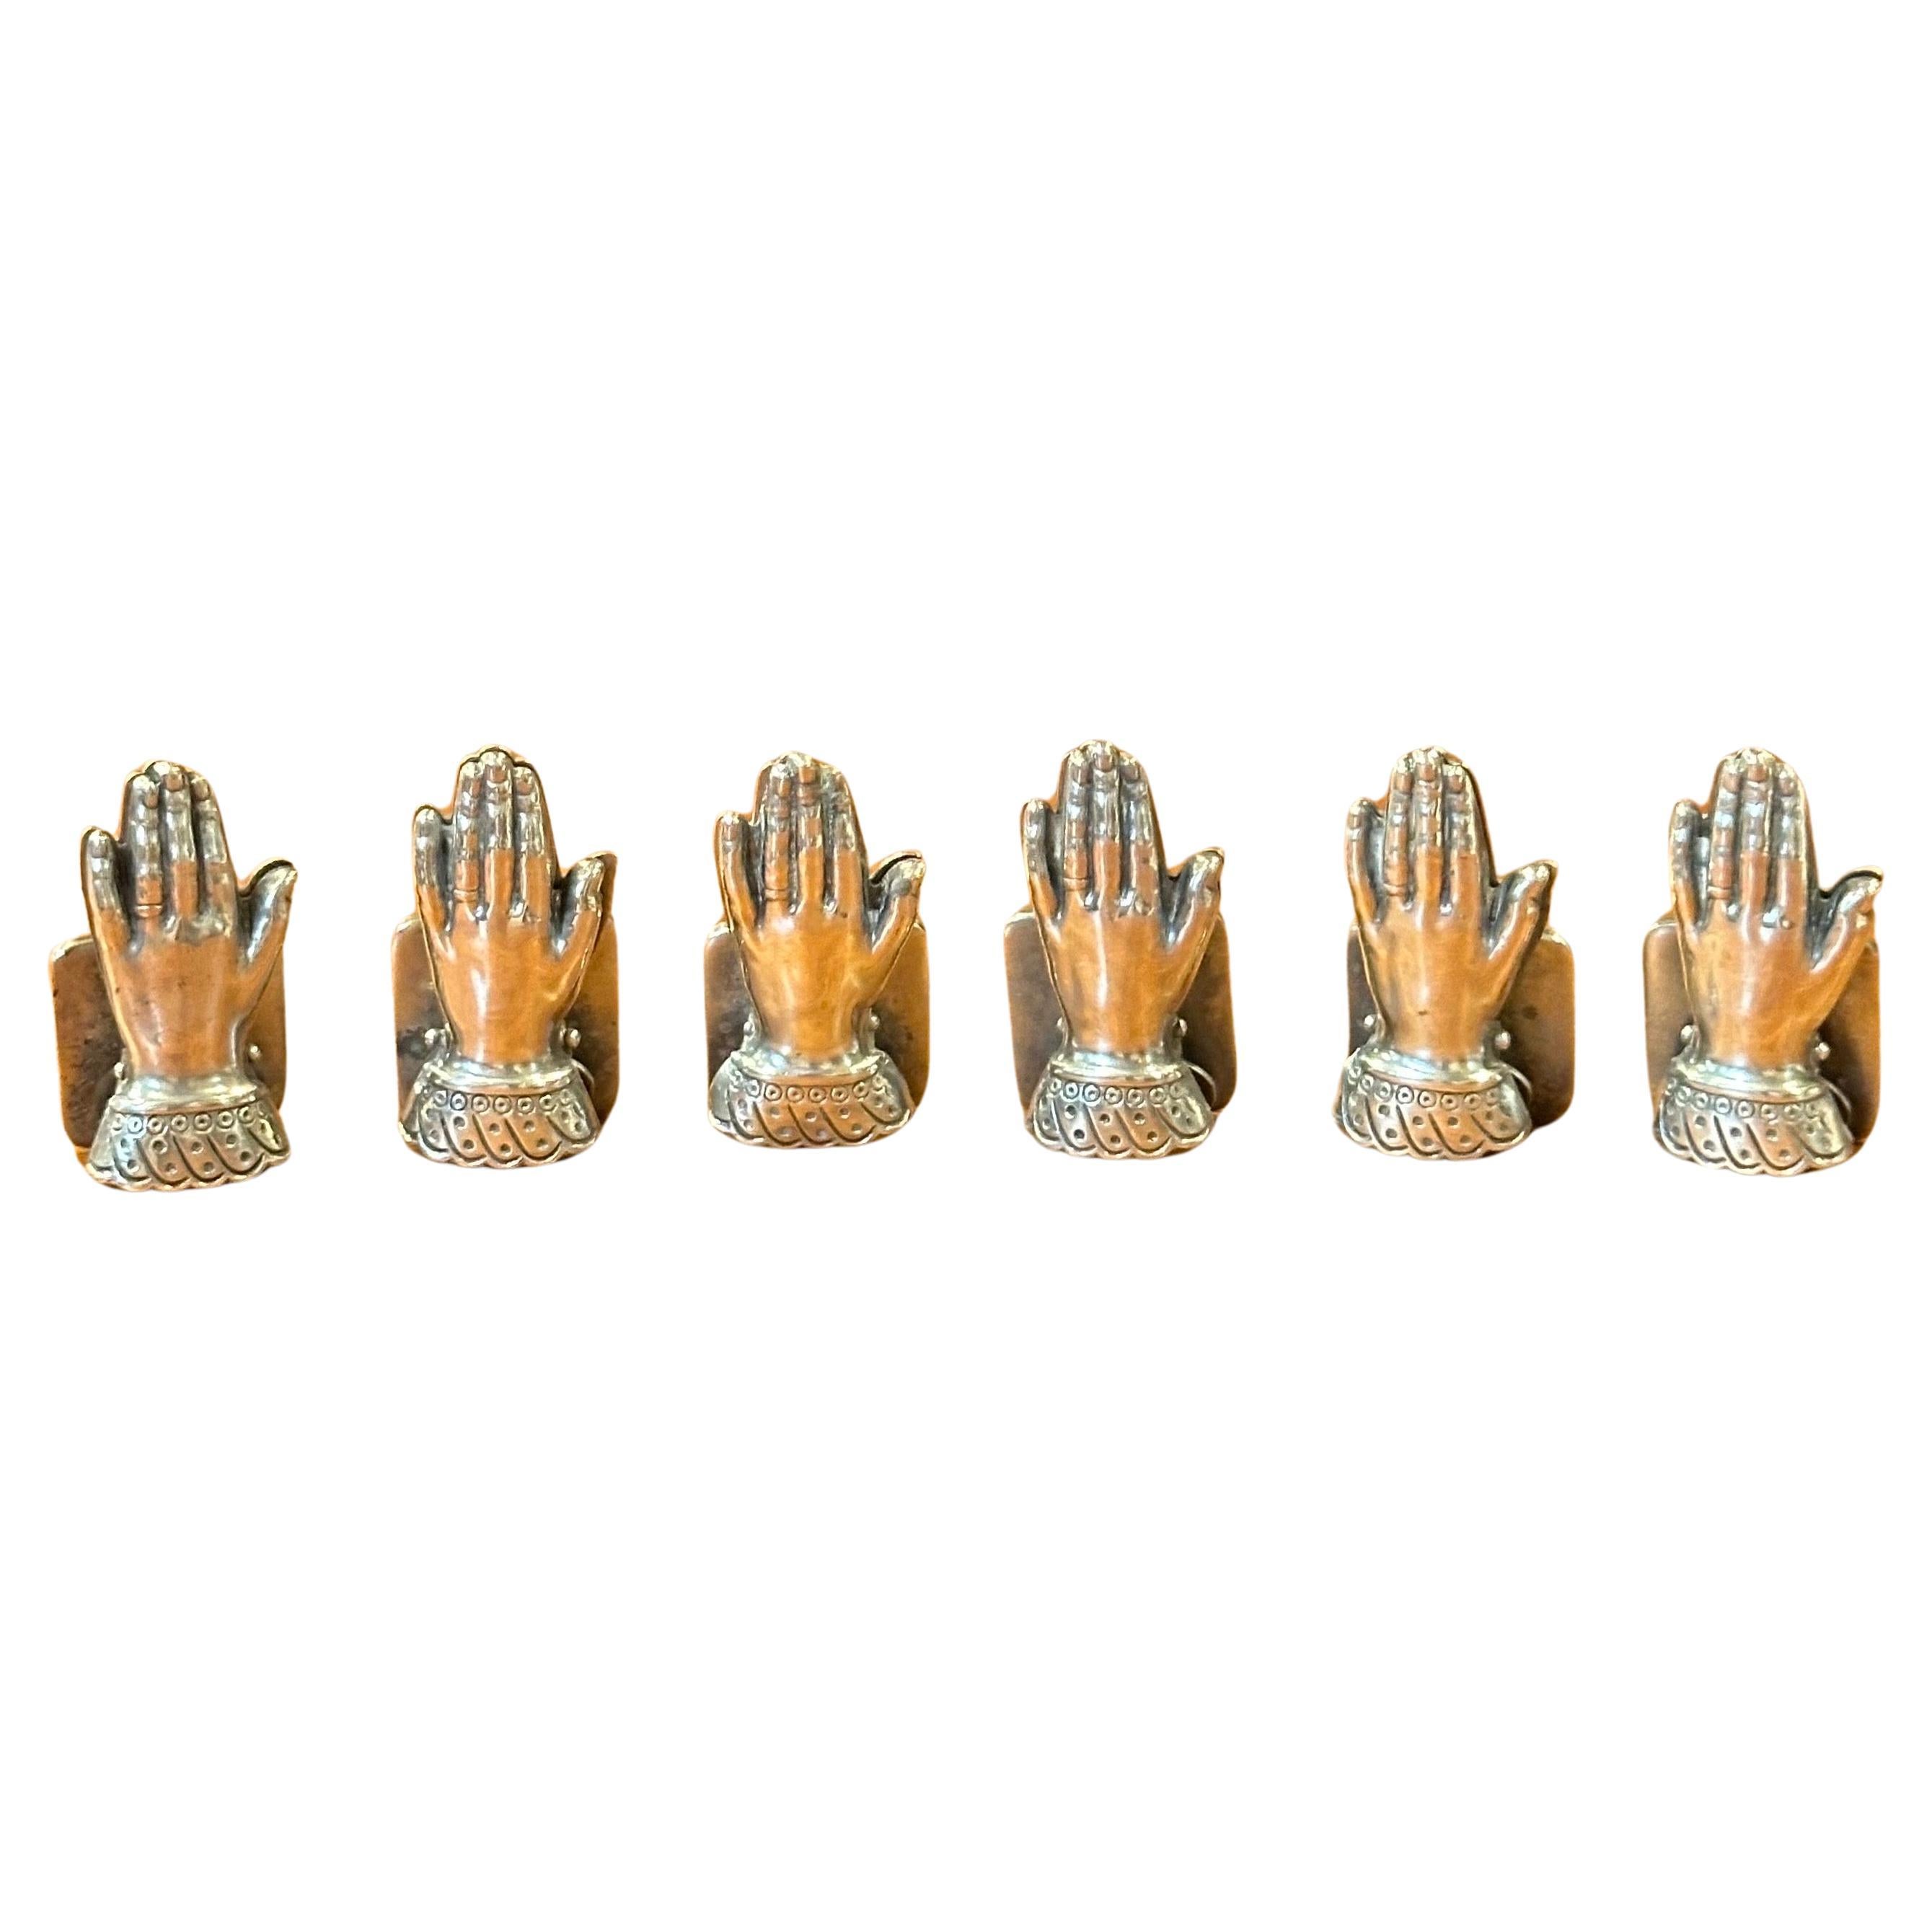 Set of Six "Hand" Motif Silver Plate Place Card Holders by Spritzer & Fuhrmann For Sale